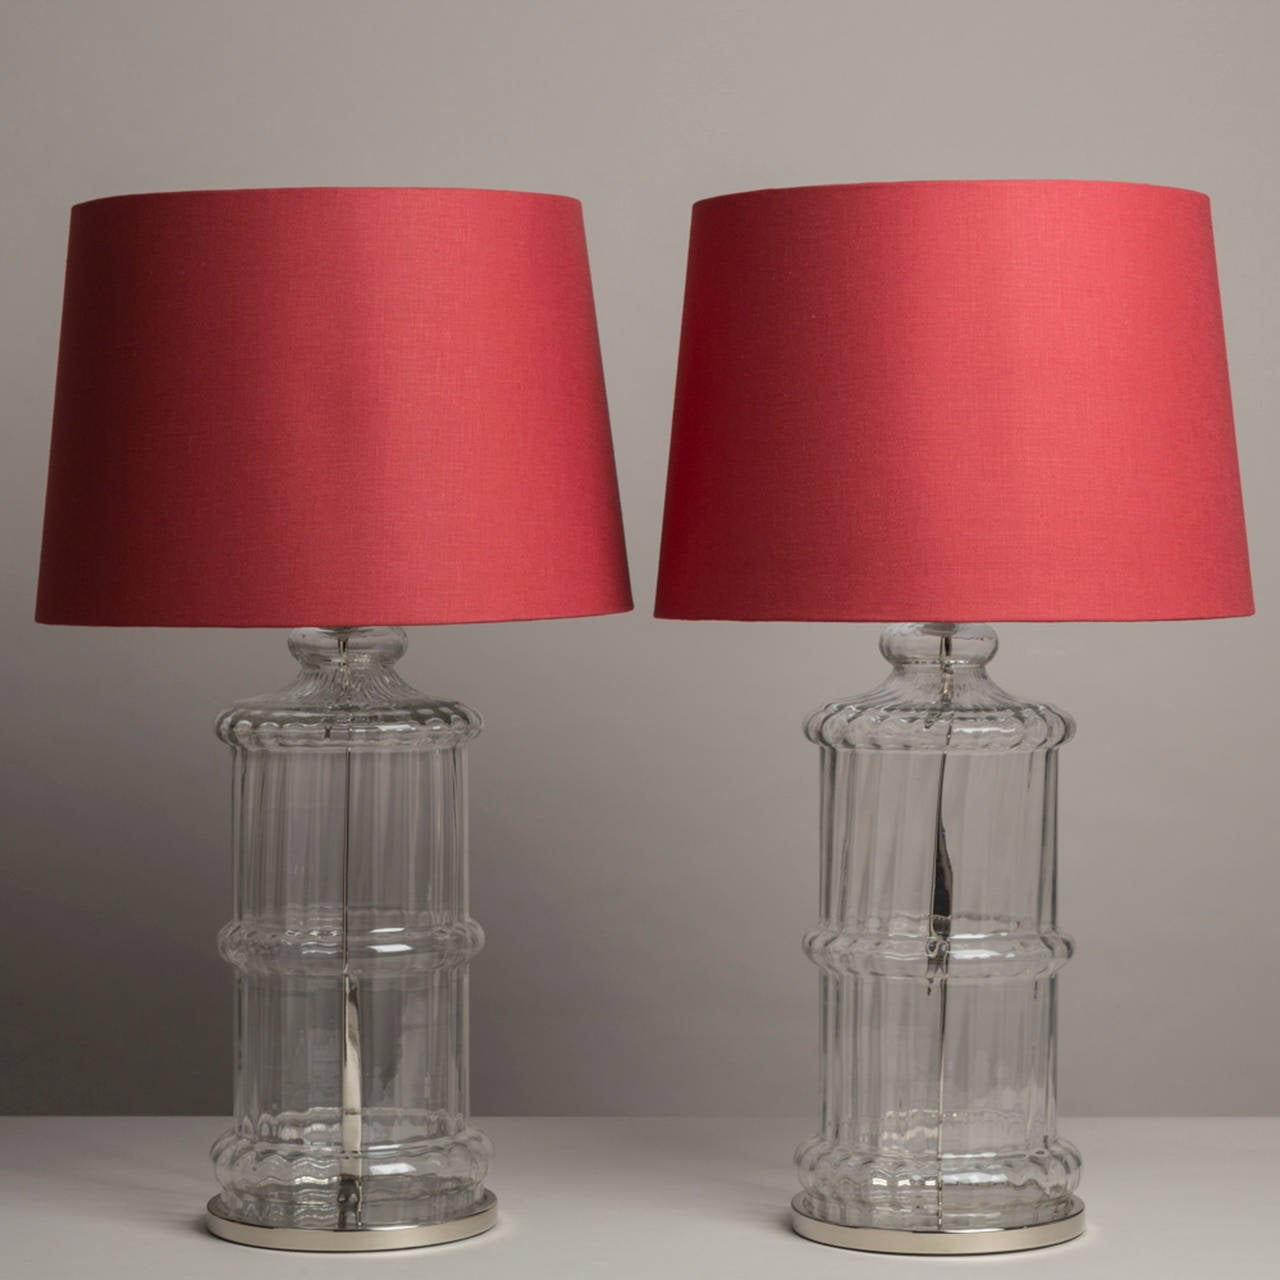 A pair of moulded ribbed glass table lamps with nickel plated detail, 1970s
Accompanied with red linen shades.
